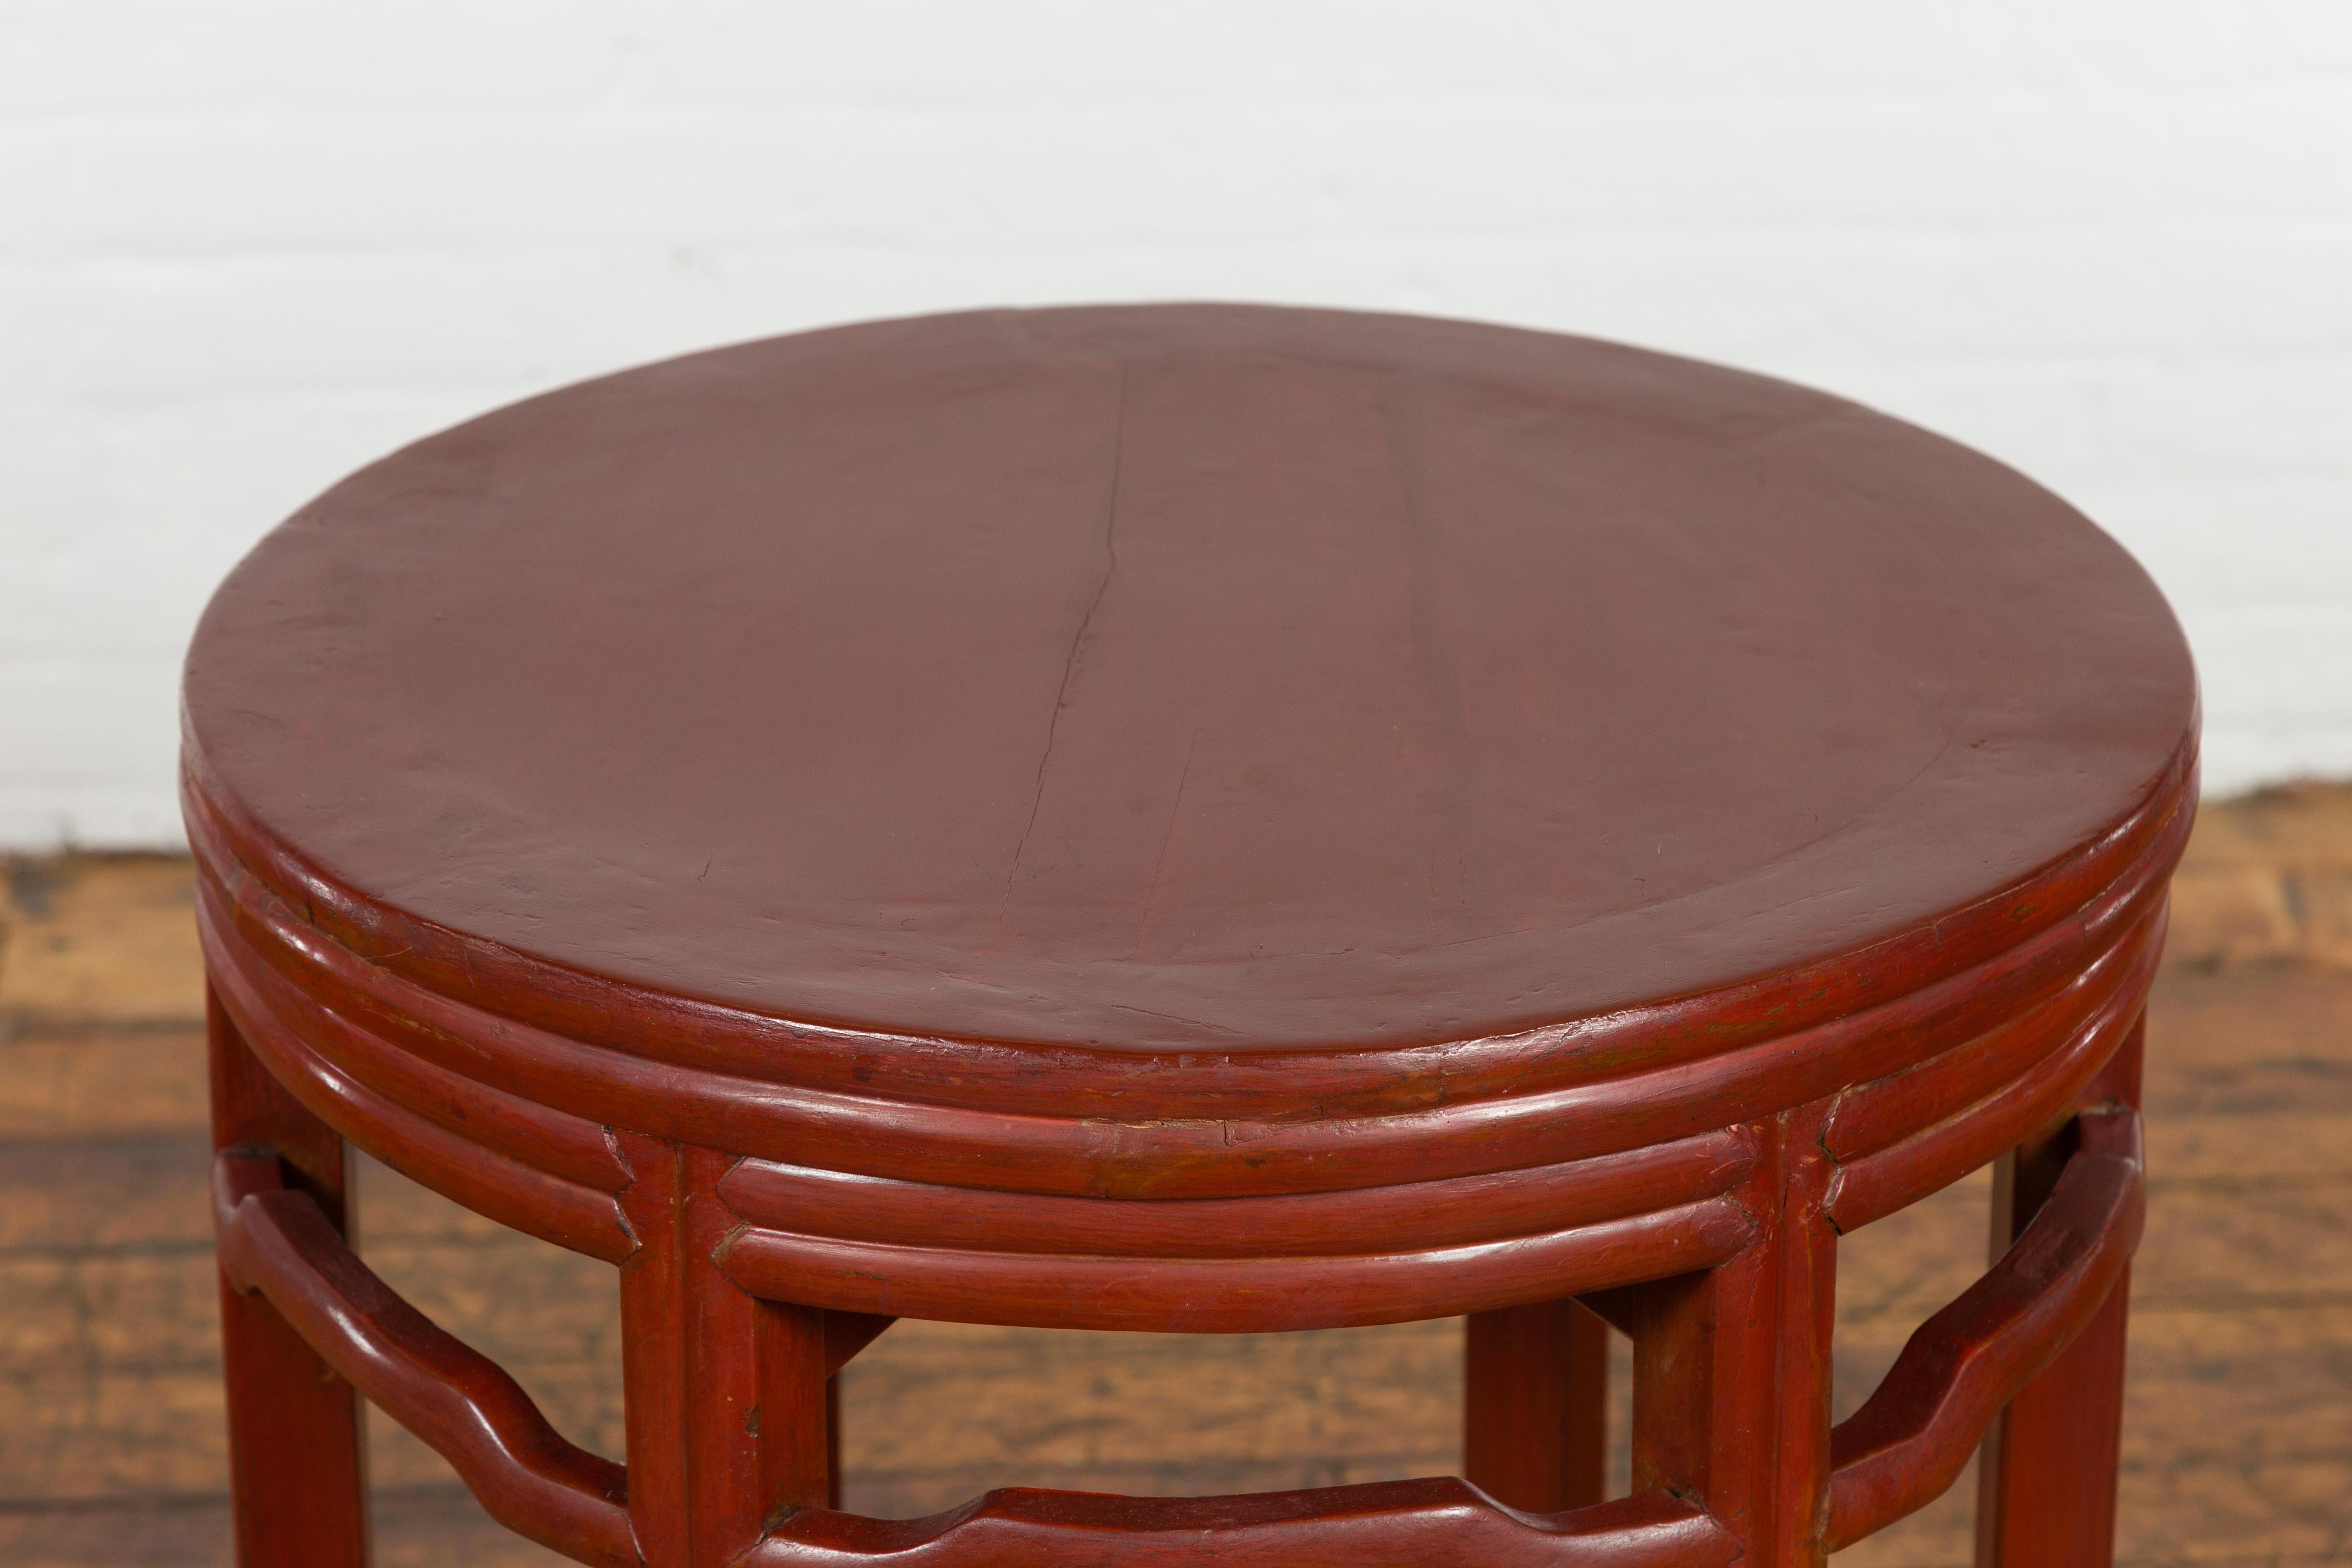 20th Century Chinese Late Qing Dynasty Period Red Lacquer Round Top Pedestal Flower Stand For Sale